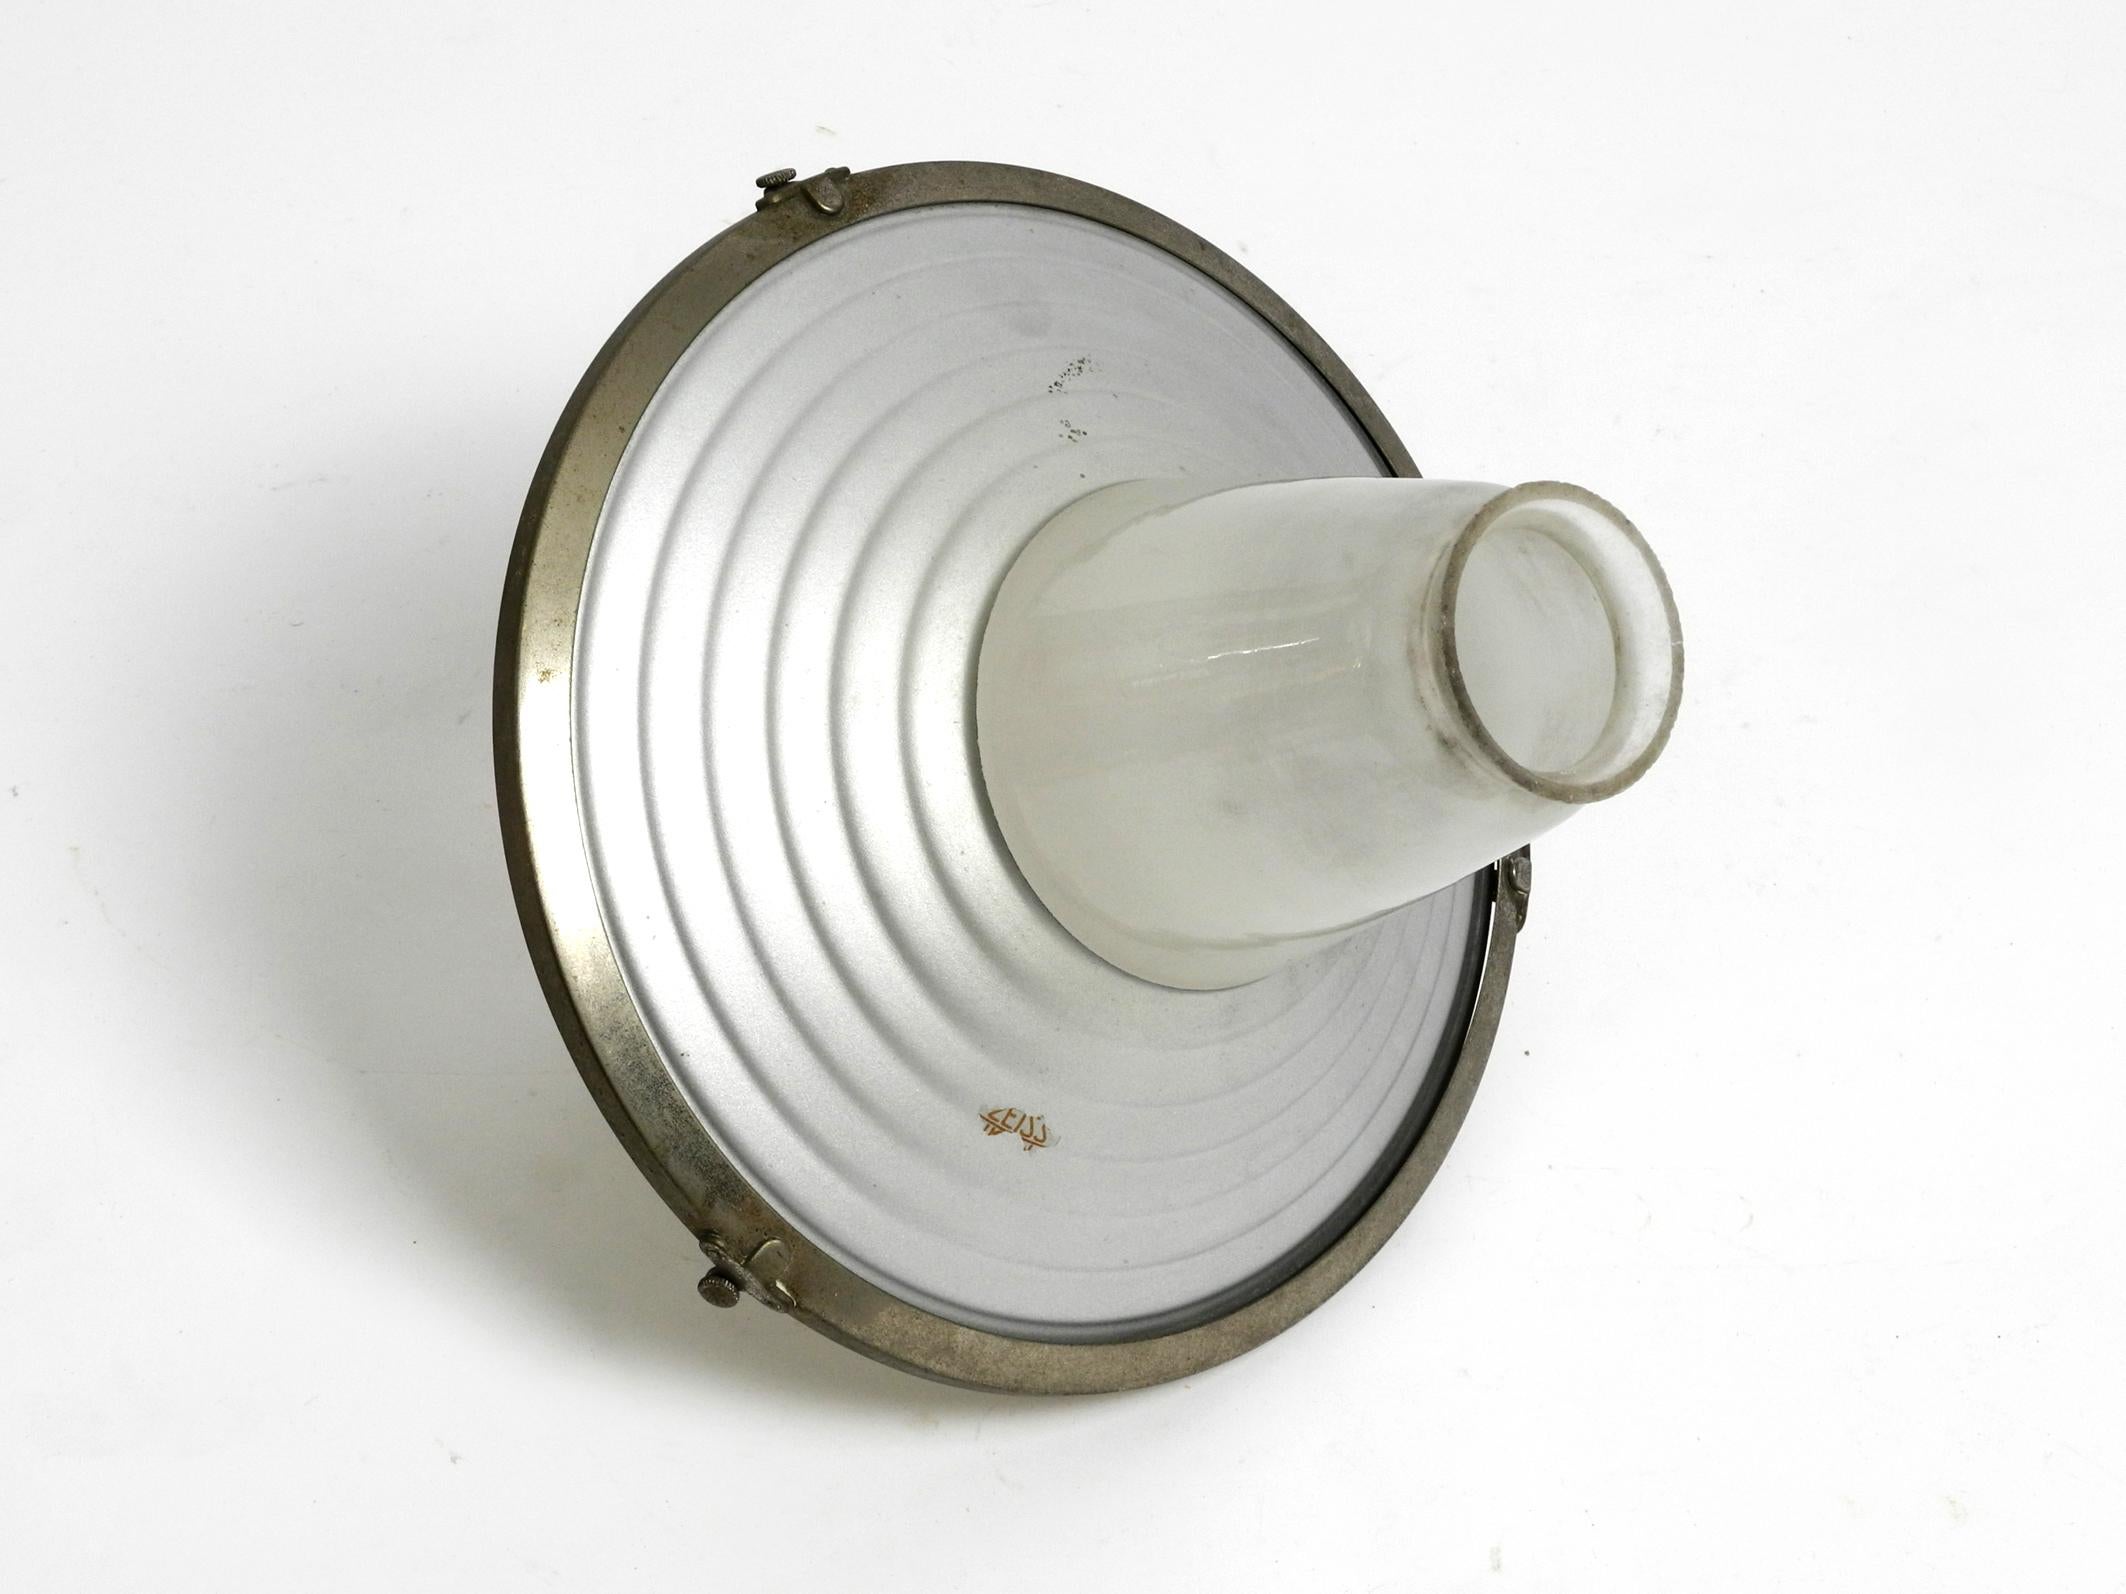 Rare 1930s Pendant Lamp by Adolf Meyer for Zeiss Ikon with an Adjustable Shade 12